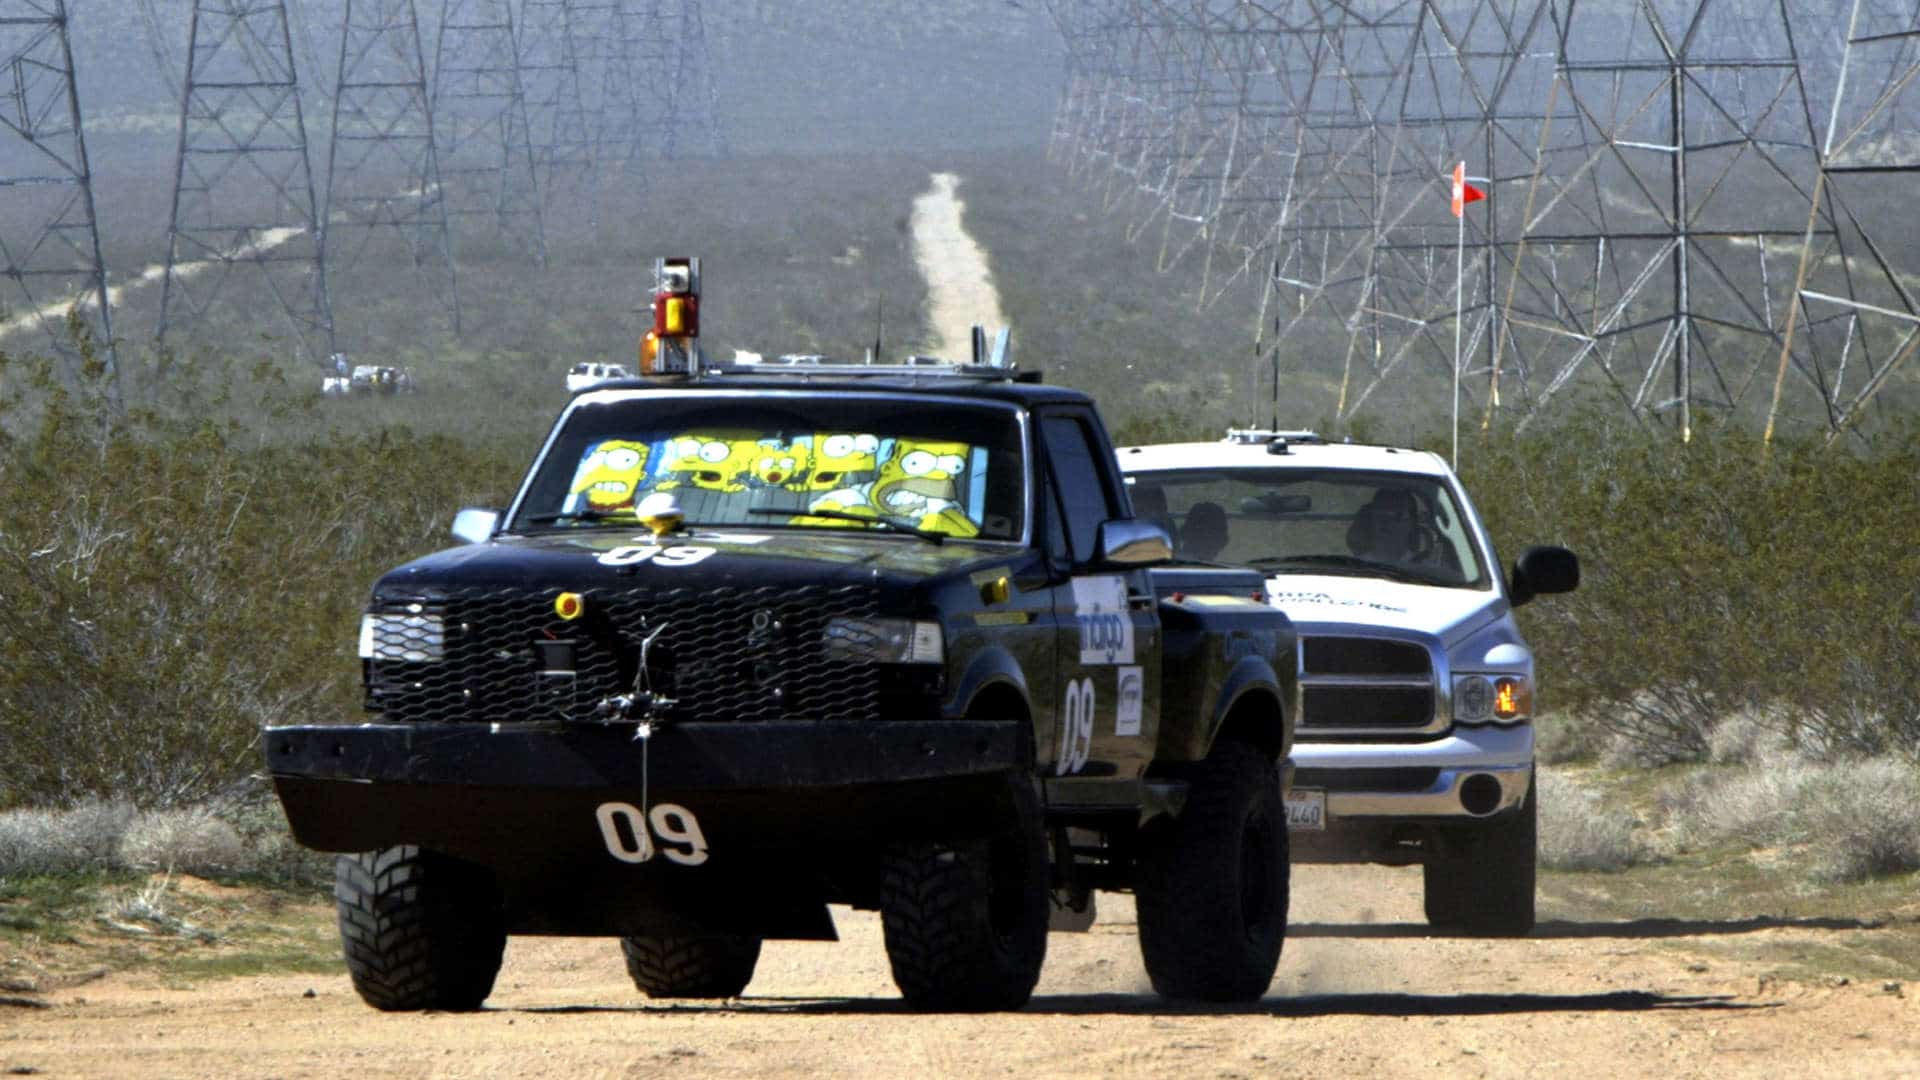 On March 13, 2004, the Defense Advanced Research Projects Agency challenged engineers to the first autonomous vehicle race. Of the 15 vehicles entered in the 142-mile race, none crossed the finish line.